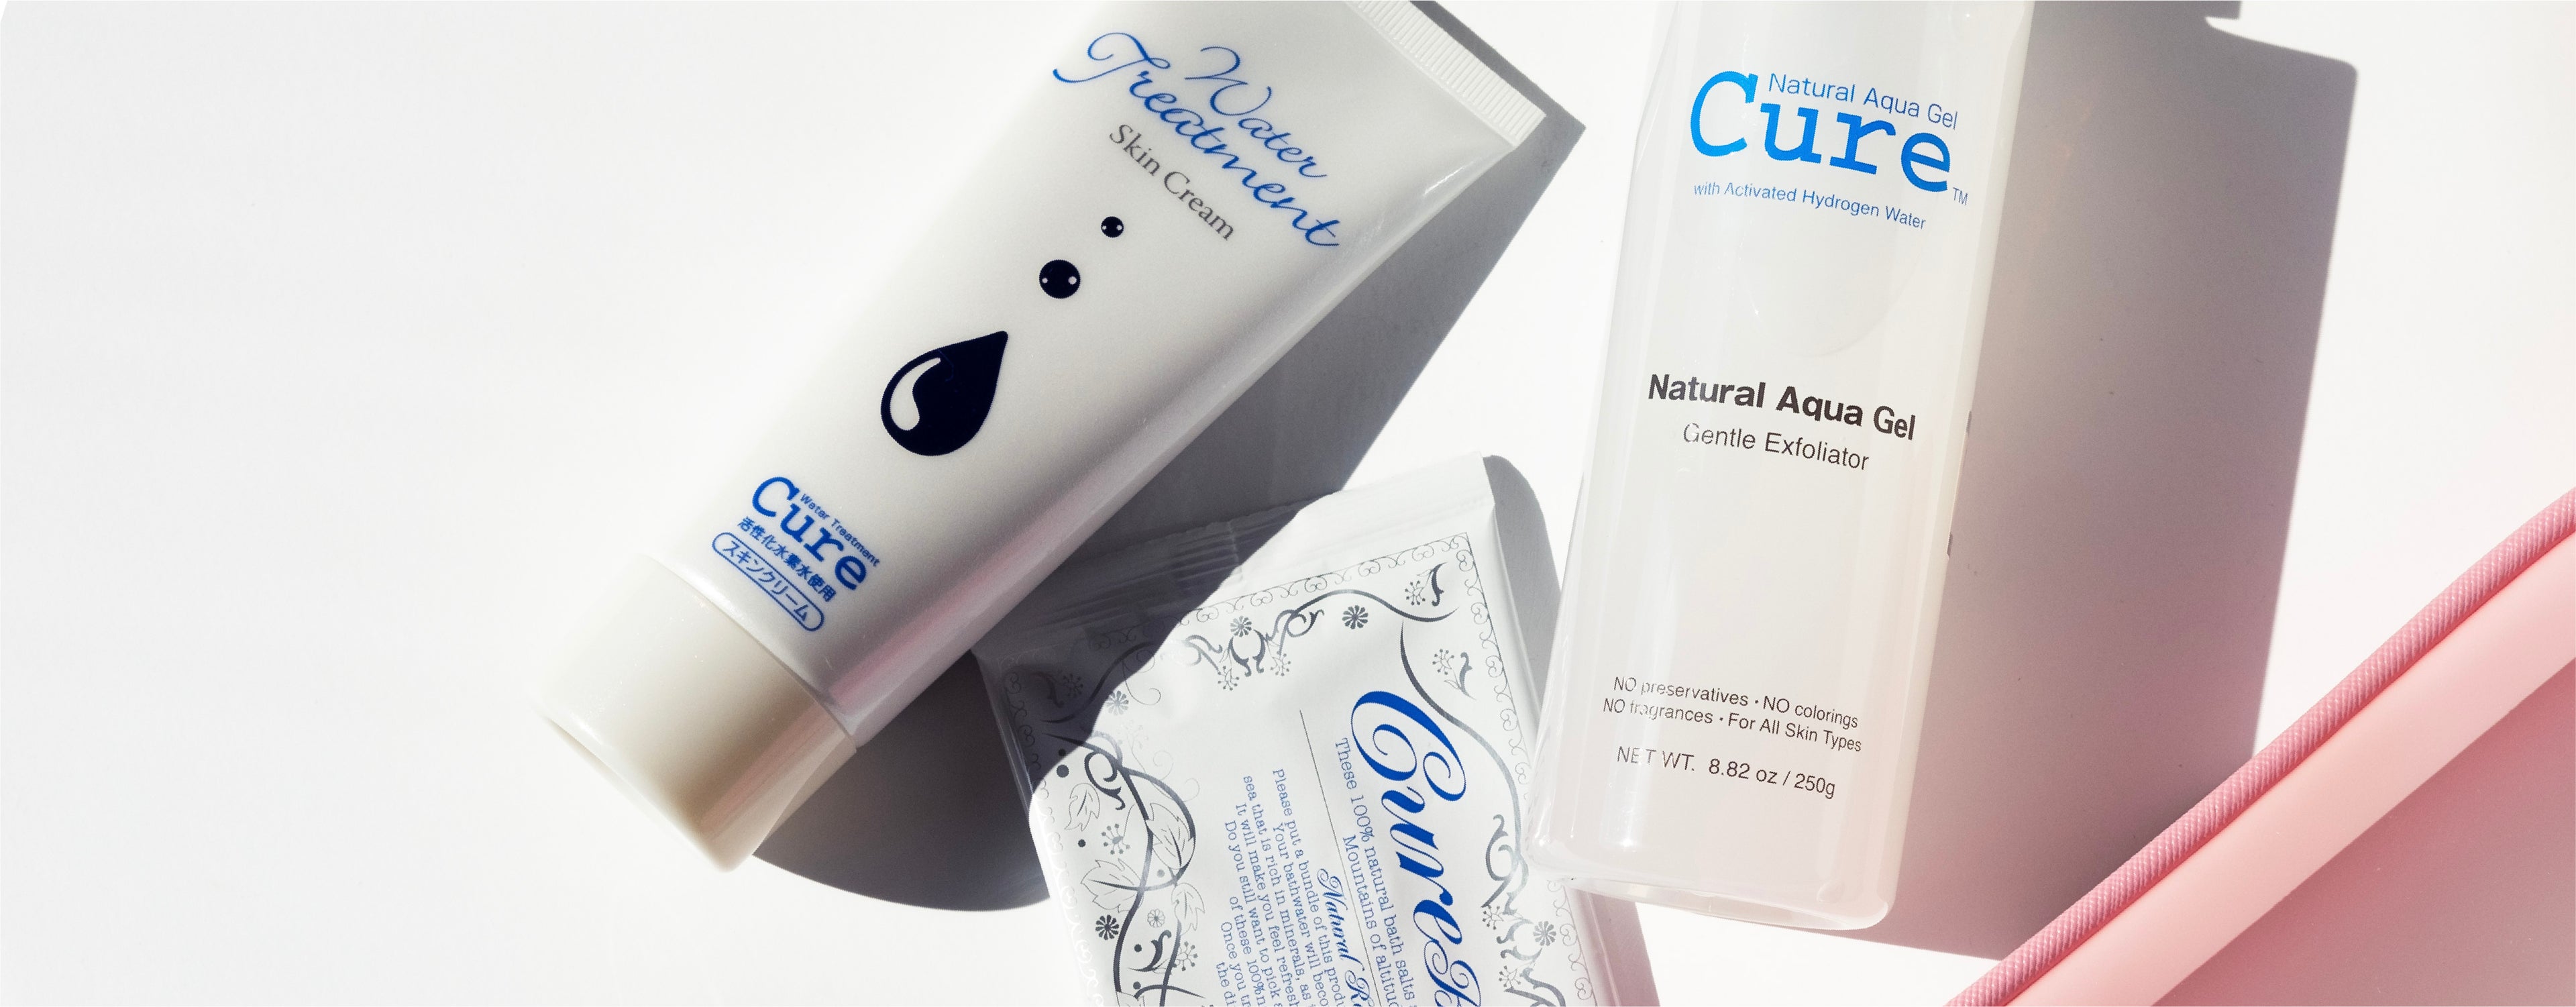 cure's gentle 3 step skincare for face and body featuring aqua gel exfoliator, water treatment moisturizer and bathtime mineral salts